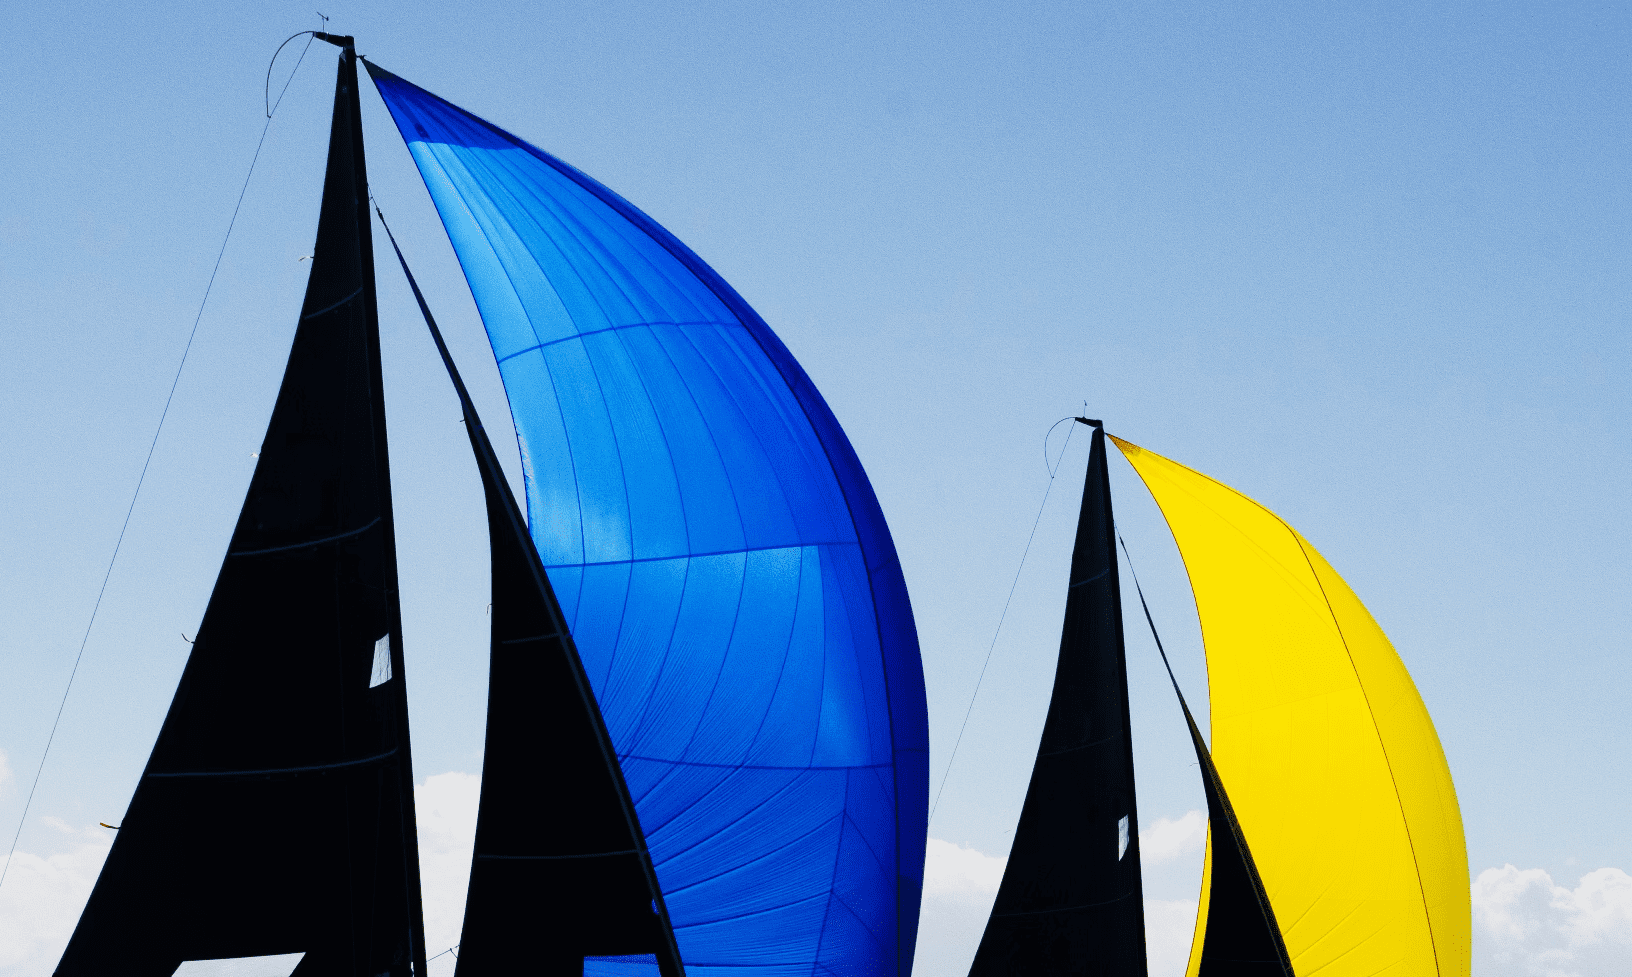 Photos of blue and yellow spinnaker sailboats